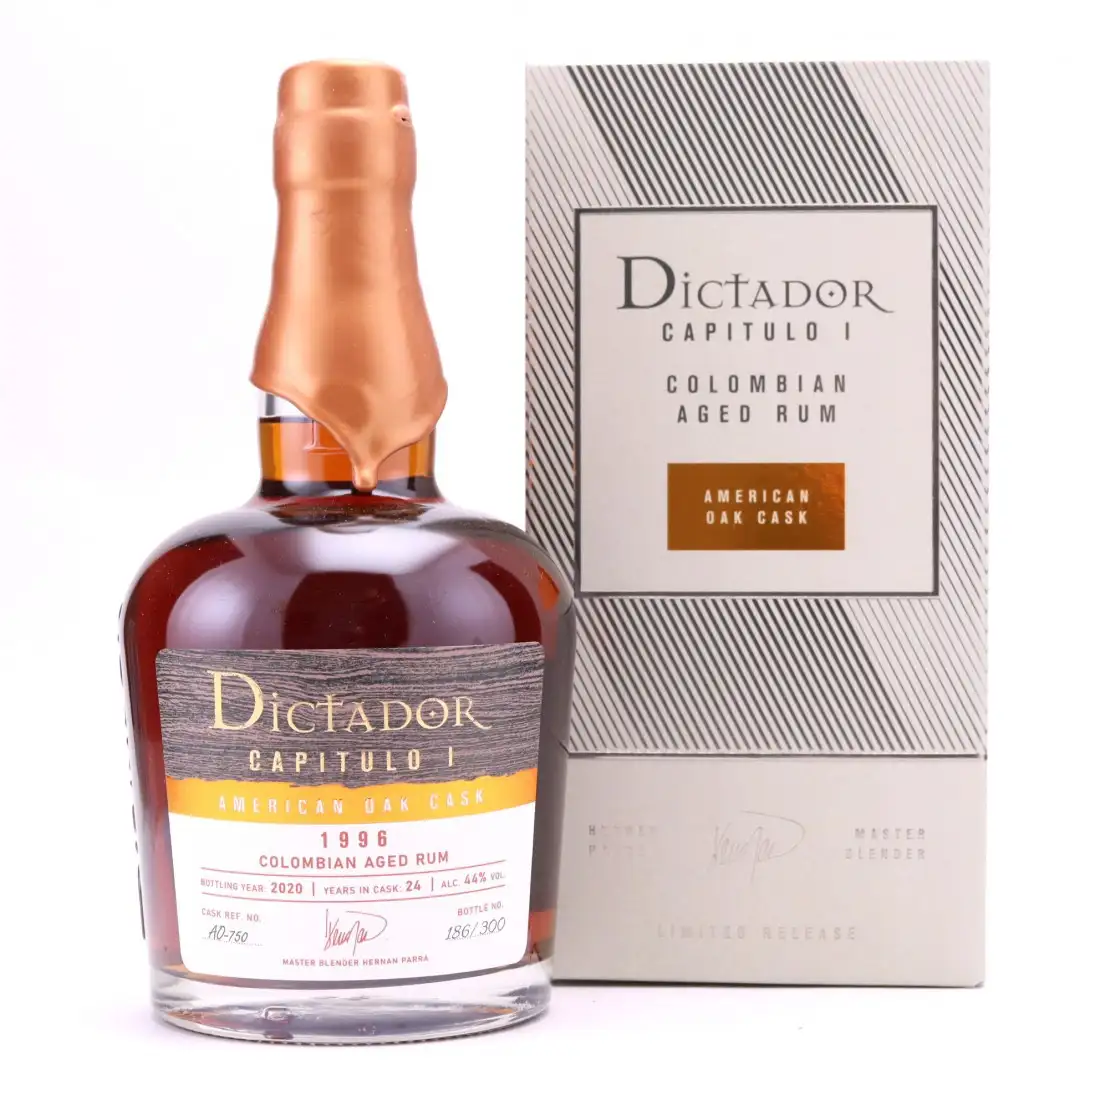 Image of the front of the bottle of the rum Dictador Capitulo 1 American Oak Cask